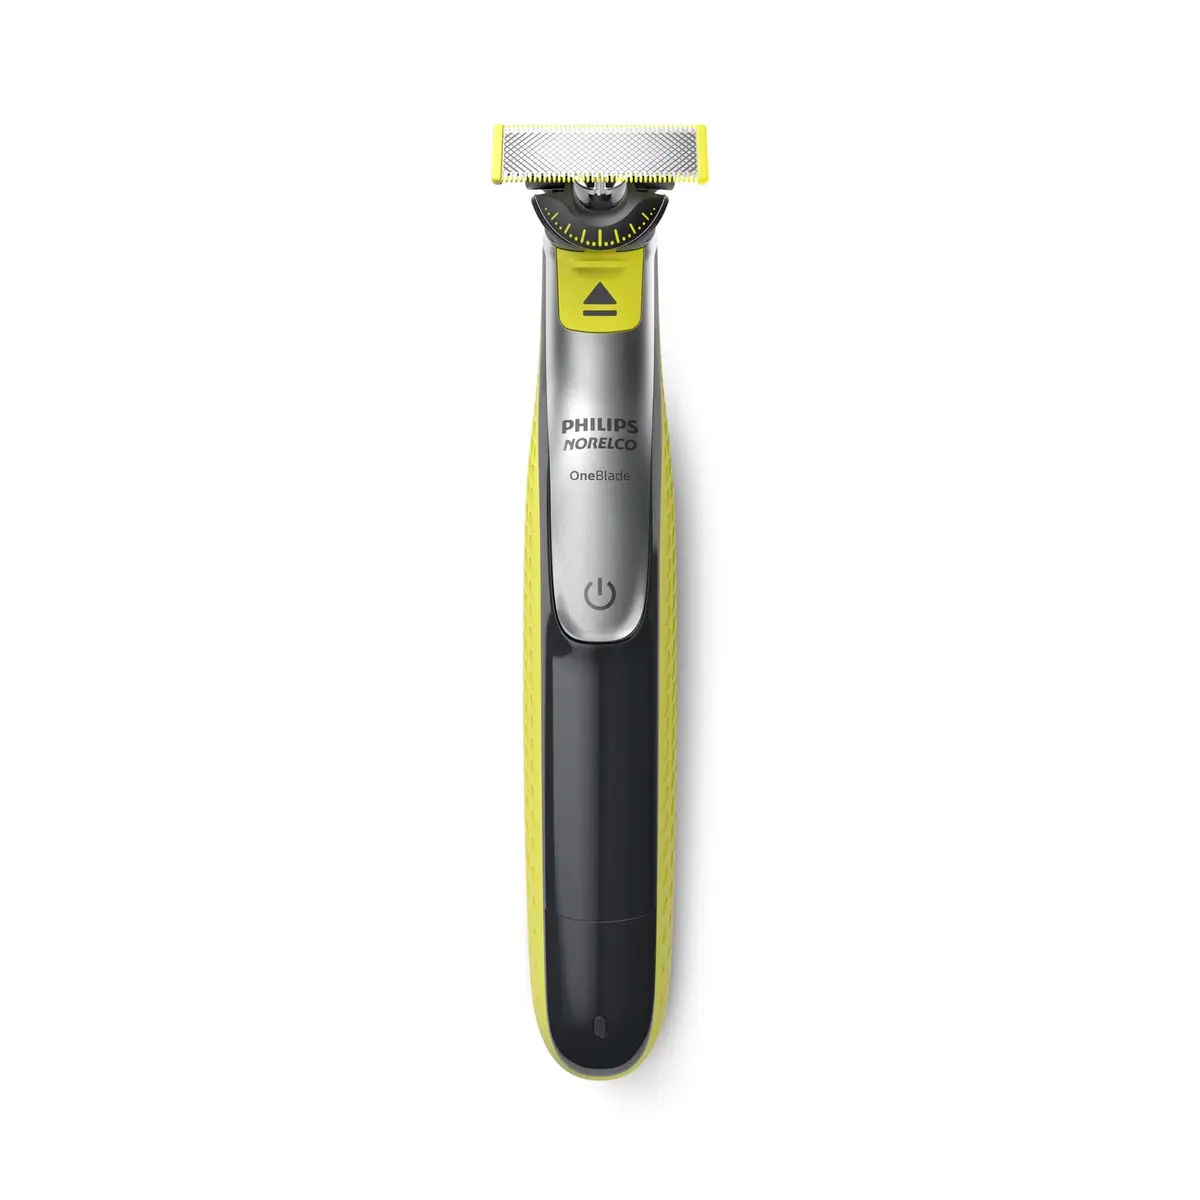 A yellow and black electric razor is on the floor.